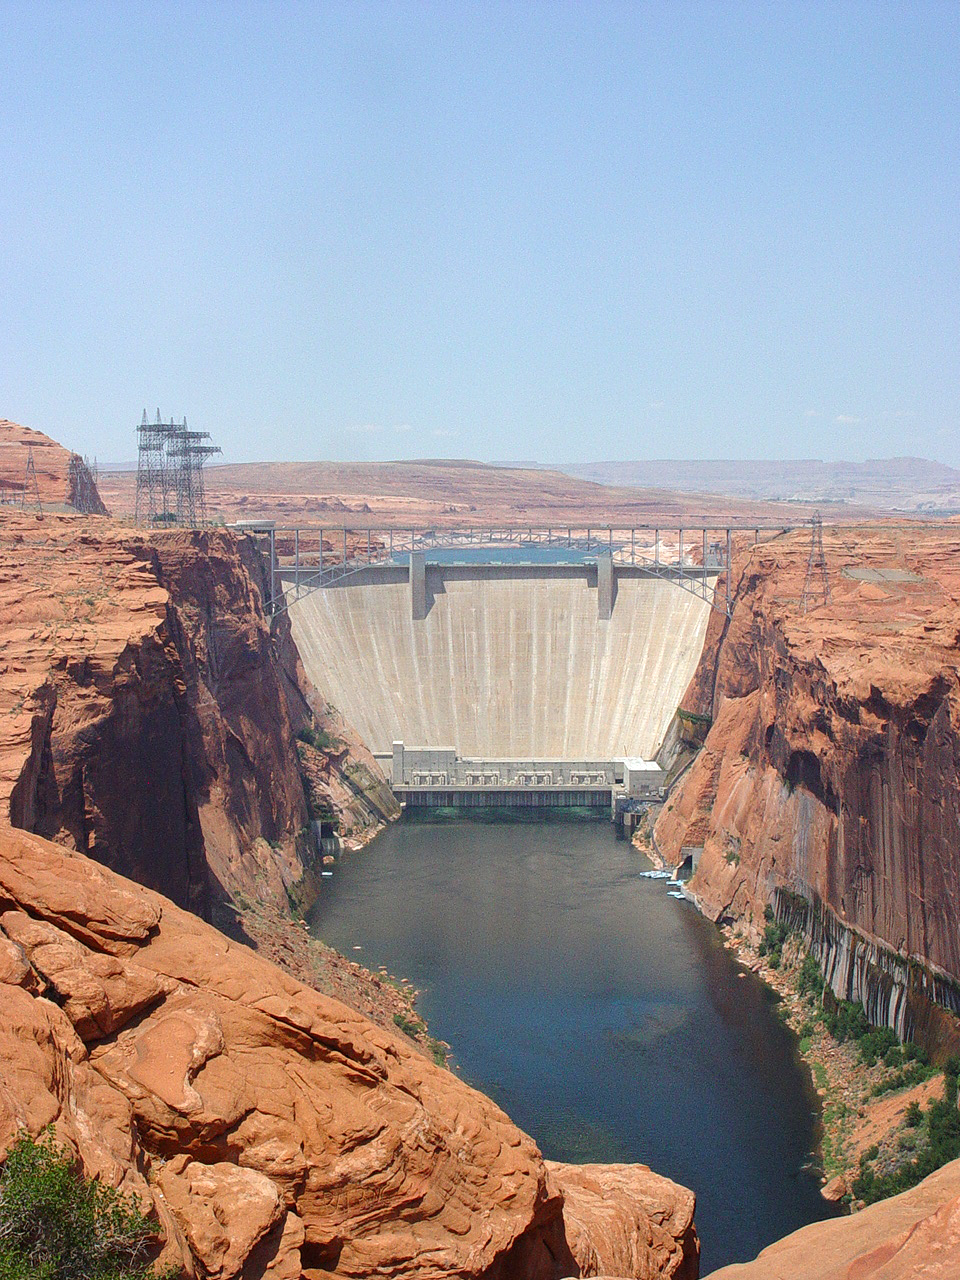 A concrete dam plugs high canyon walls. Buildings and wires on the sides.